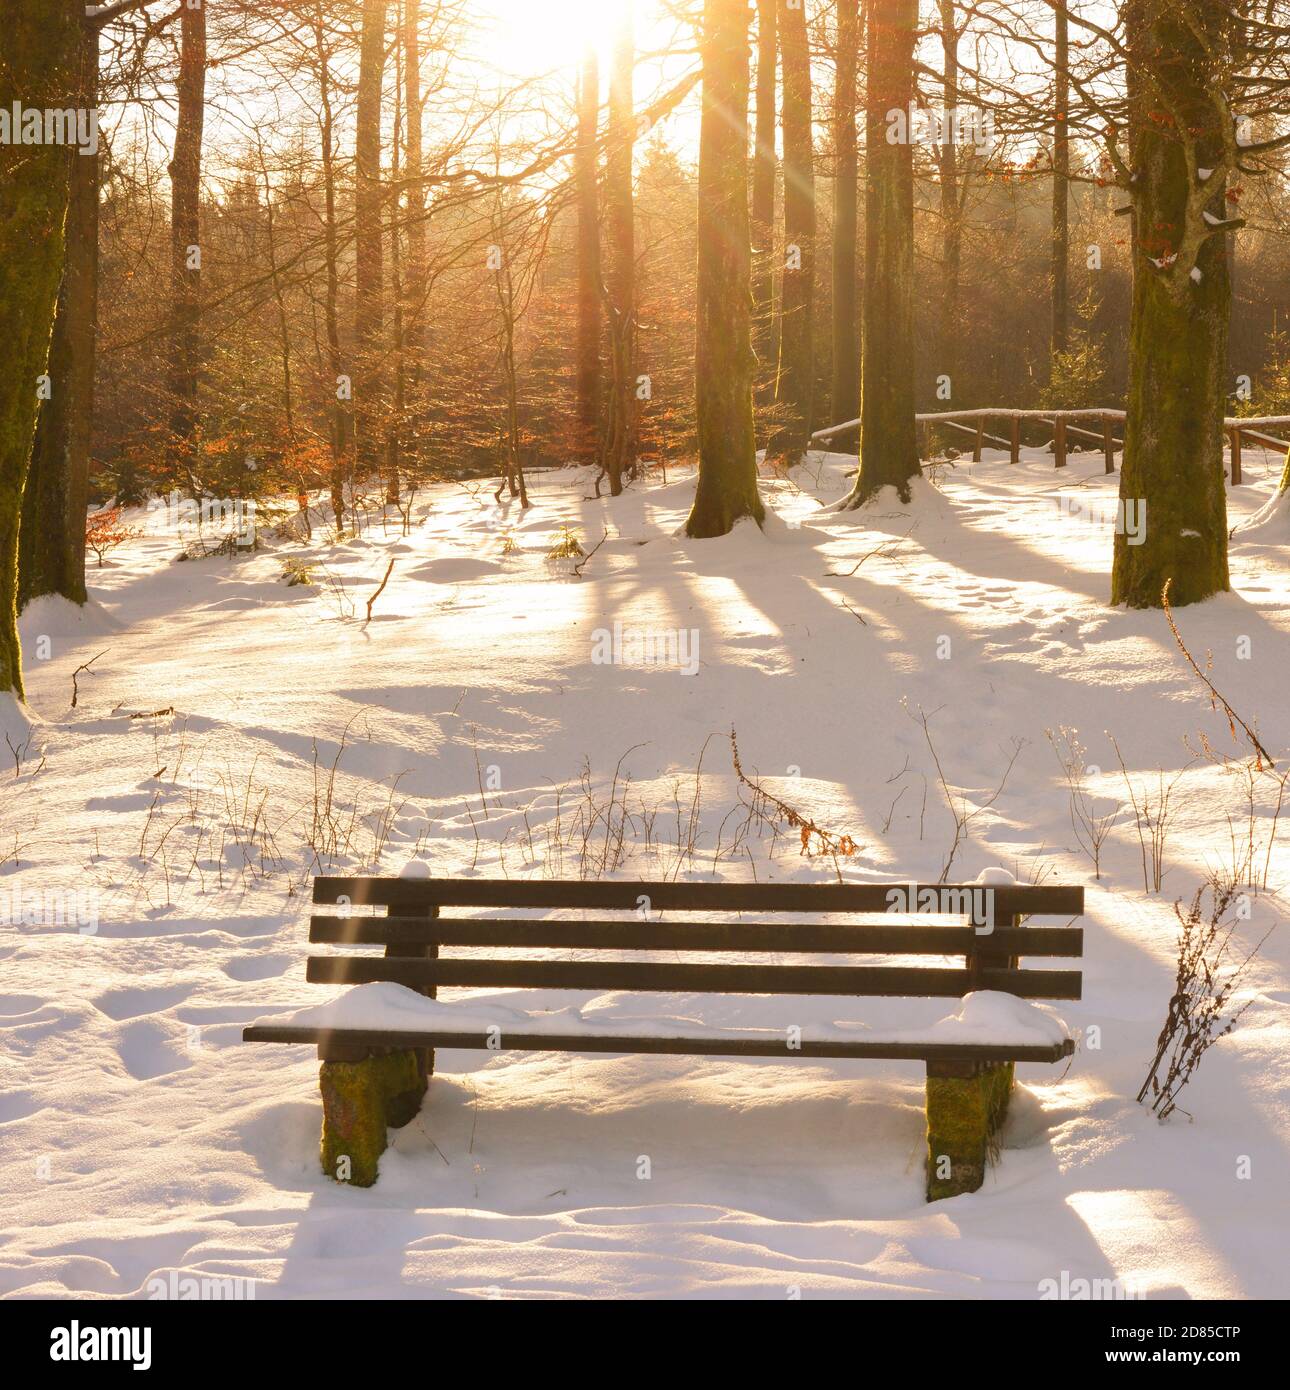 Sunny winter day beautiful light on a snow covered bench outdoors